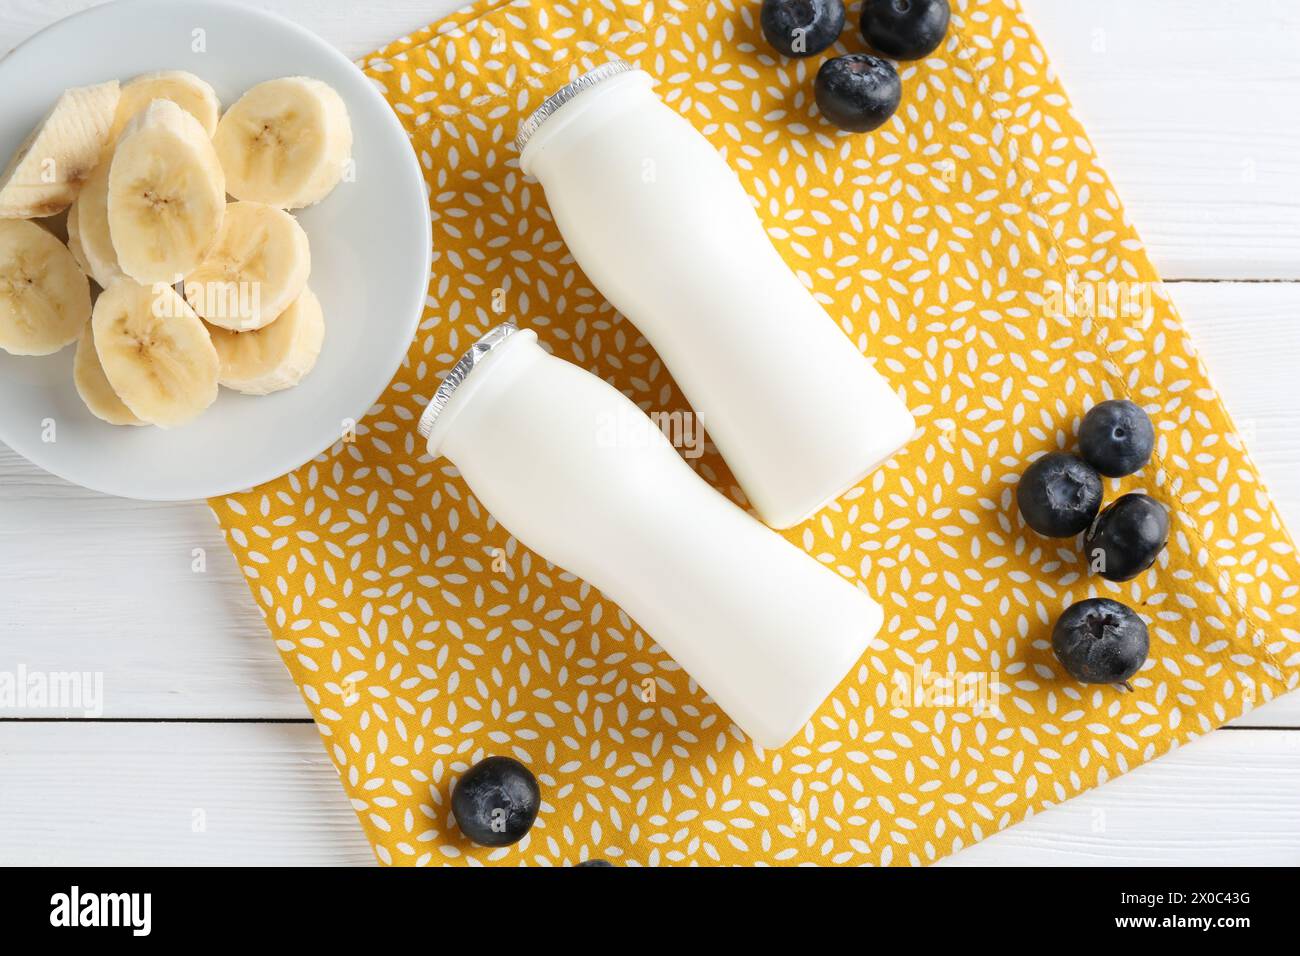 Tasty yogurt in bottles, banana and blueberries on white wooden table, top view Stock Photo